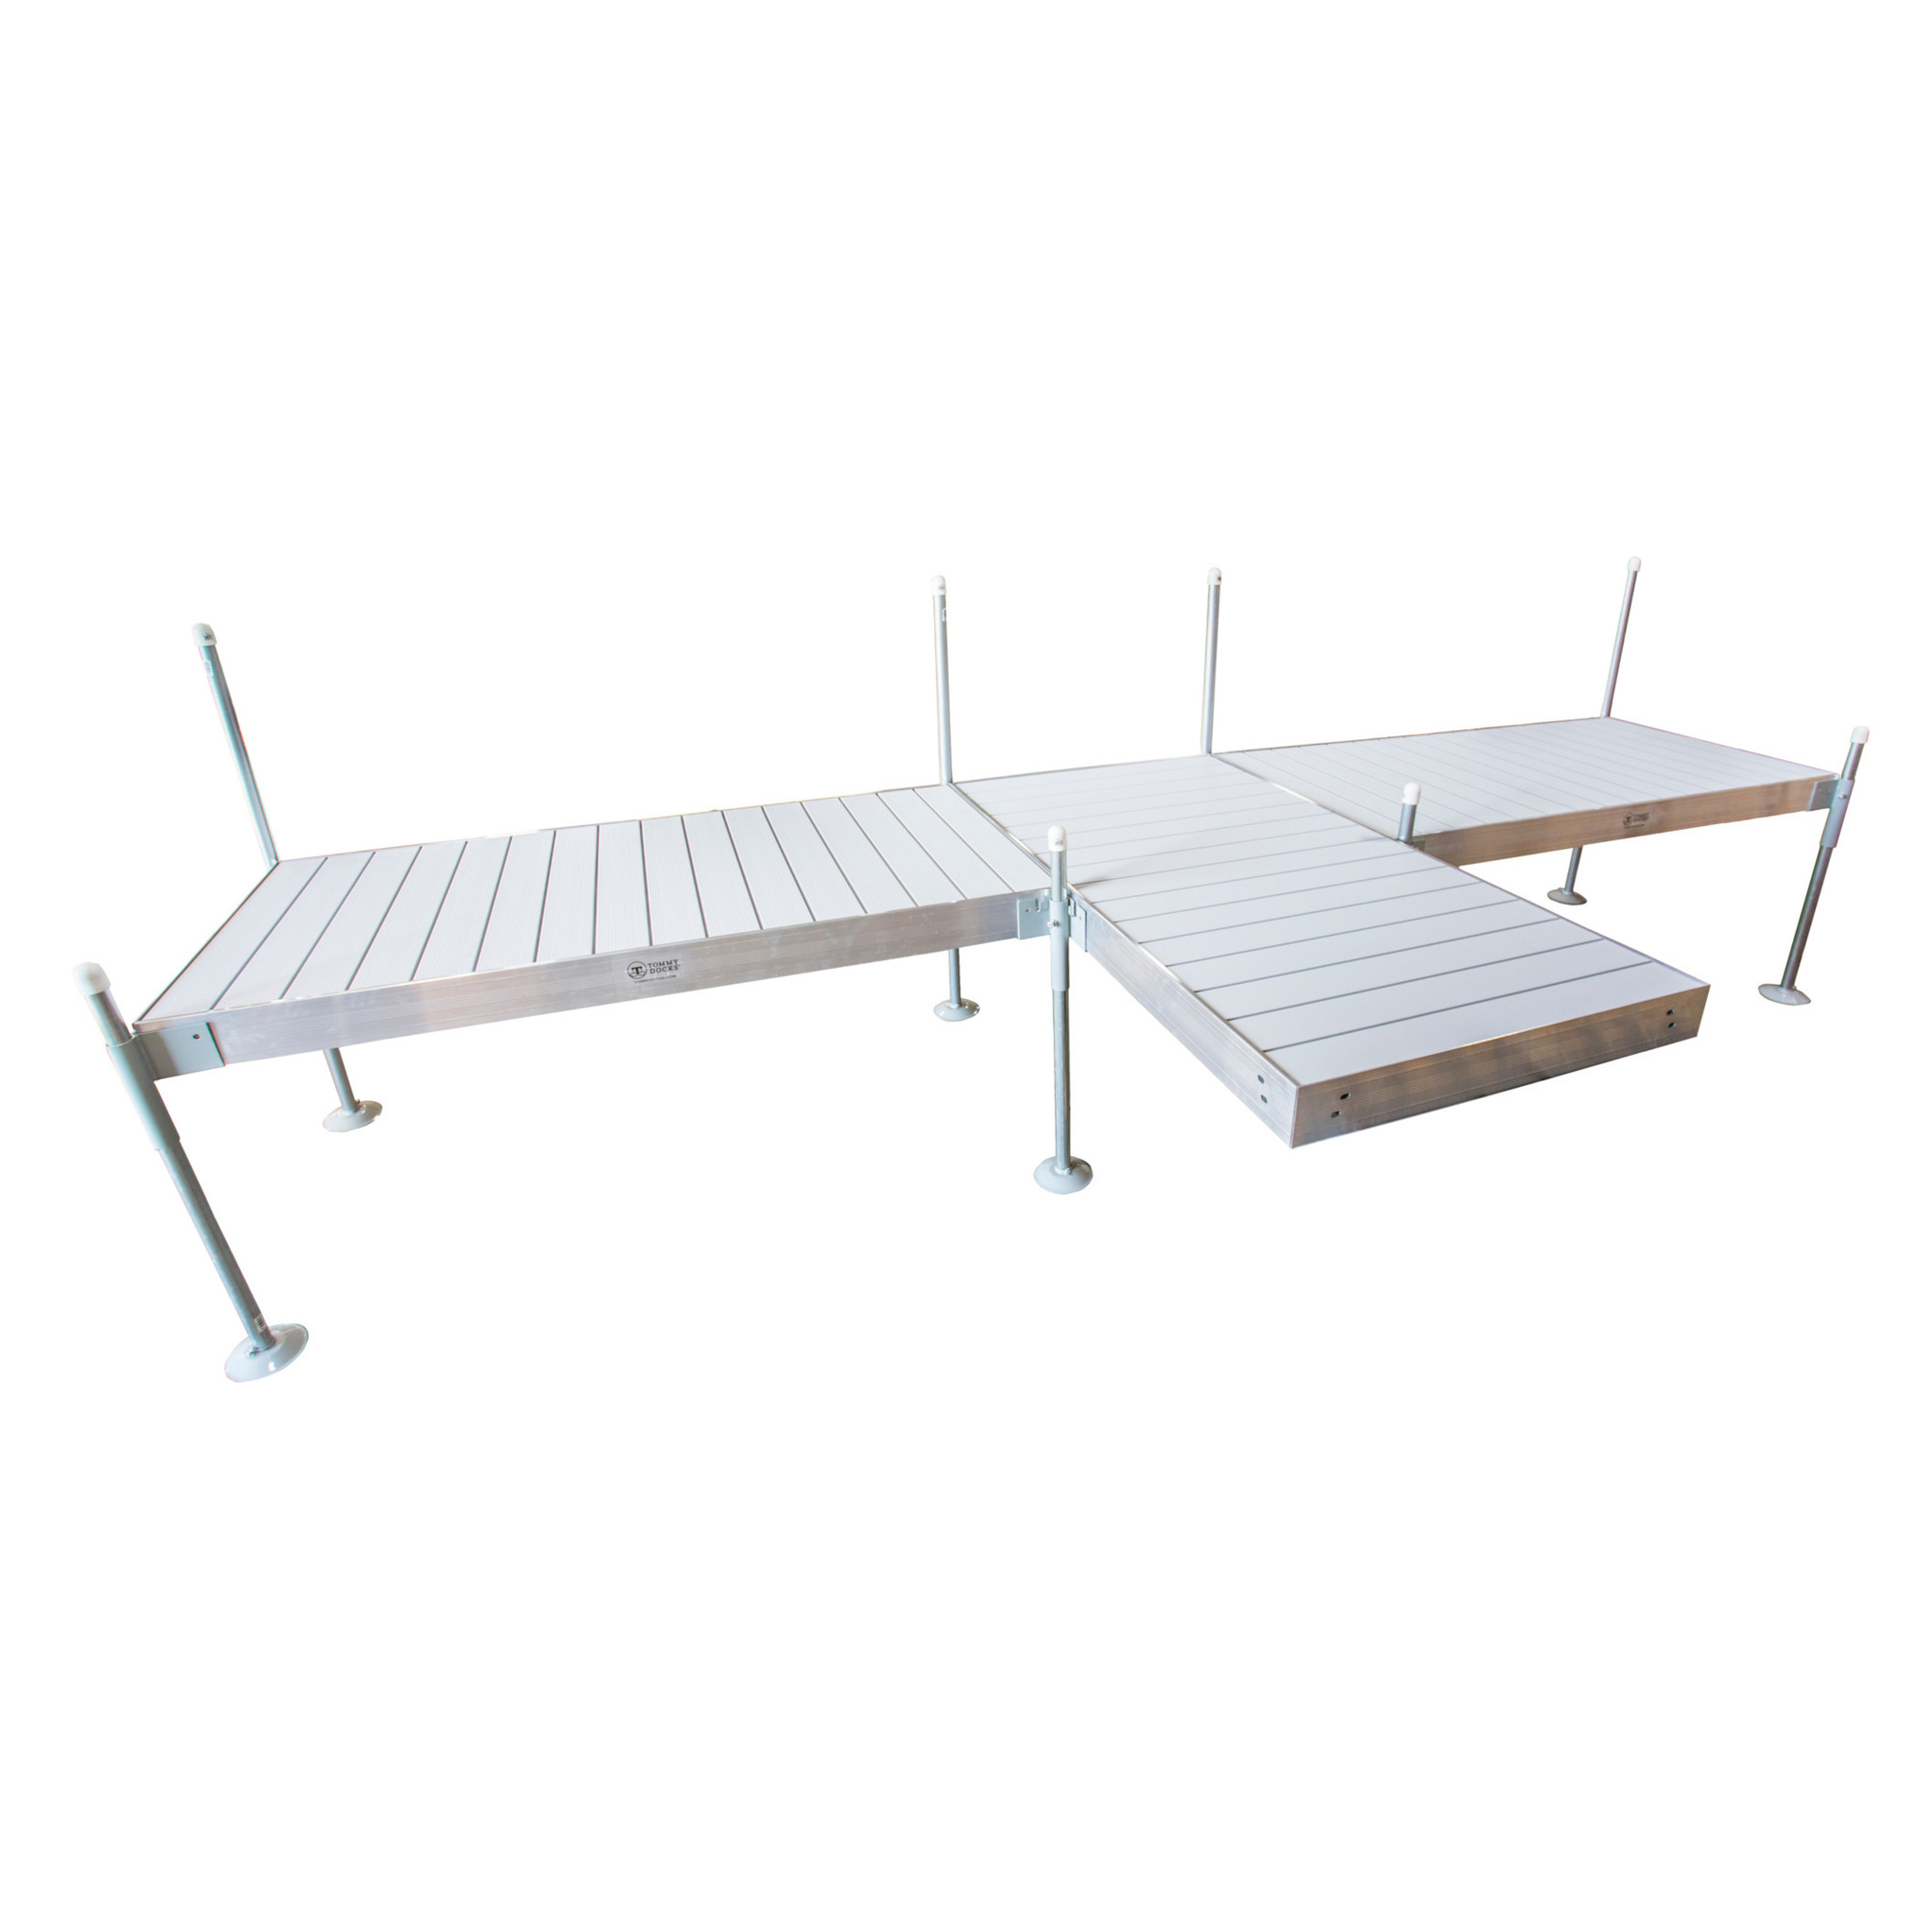 Tommy Docks, 8ft. T-Shaped Aluminum Platinum, Product Type Dock, Length 48 in, Width 96 in, Model TDTAA-40021